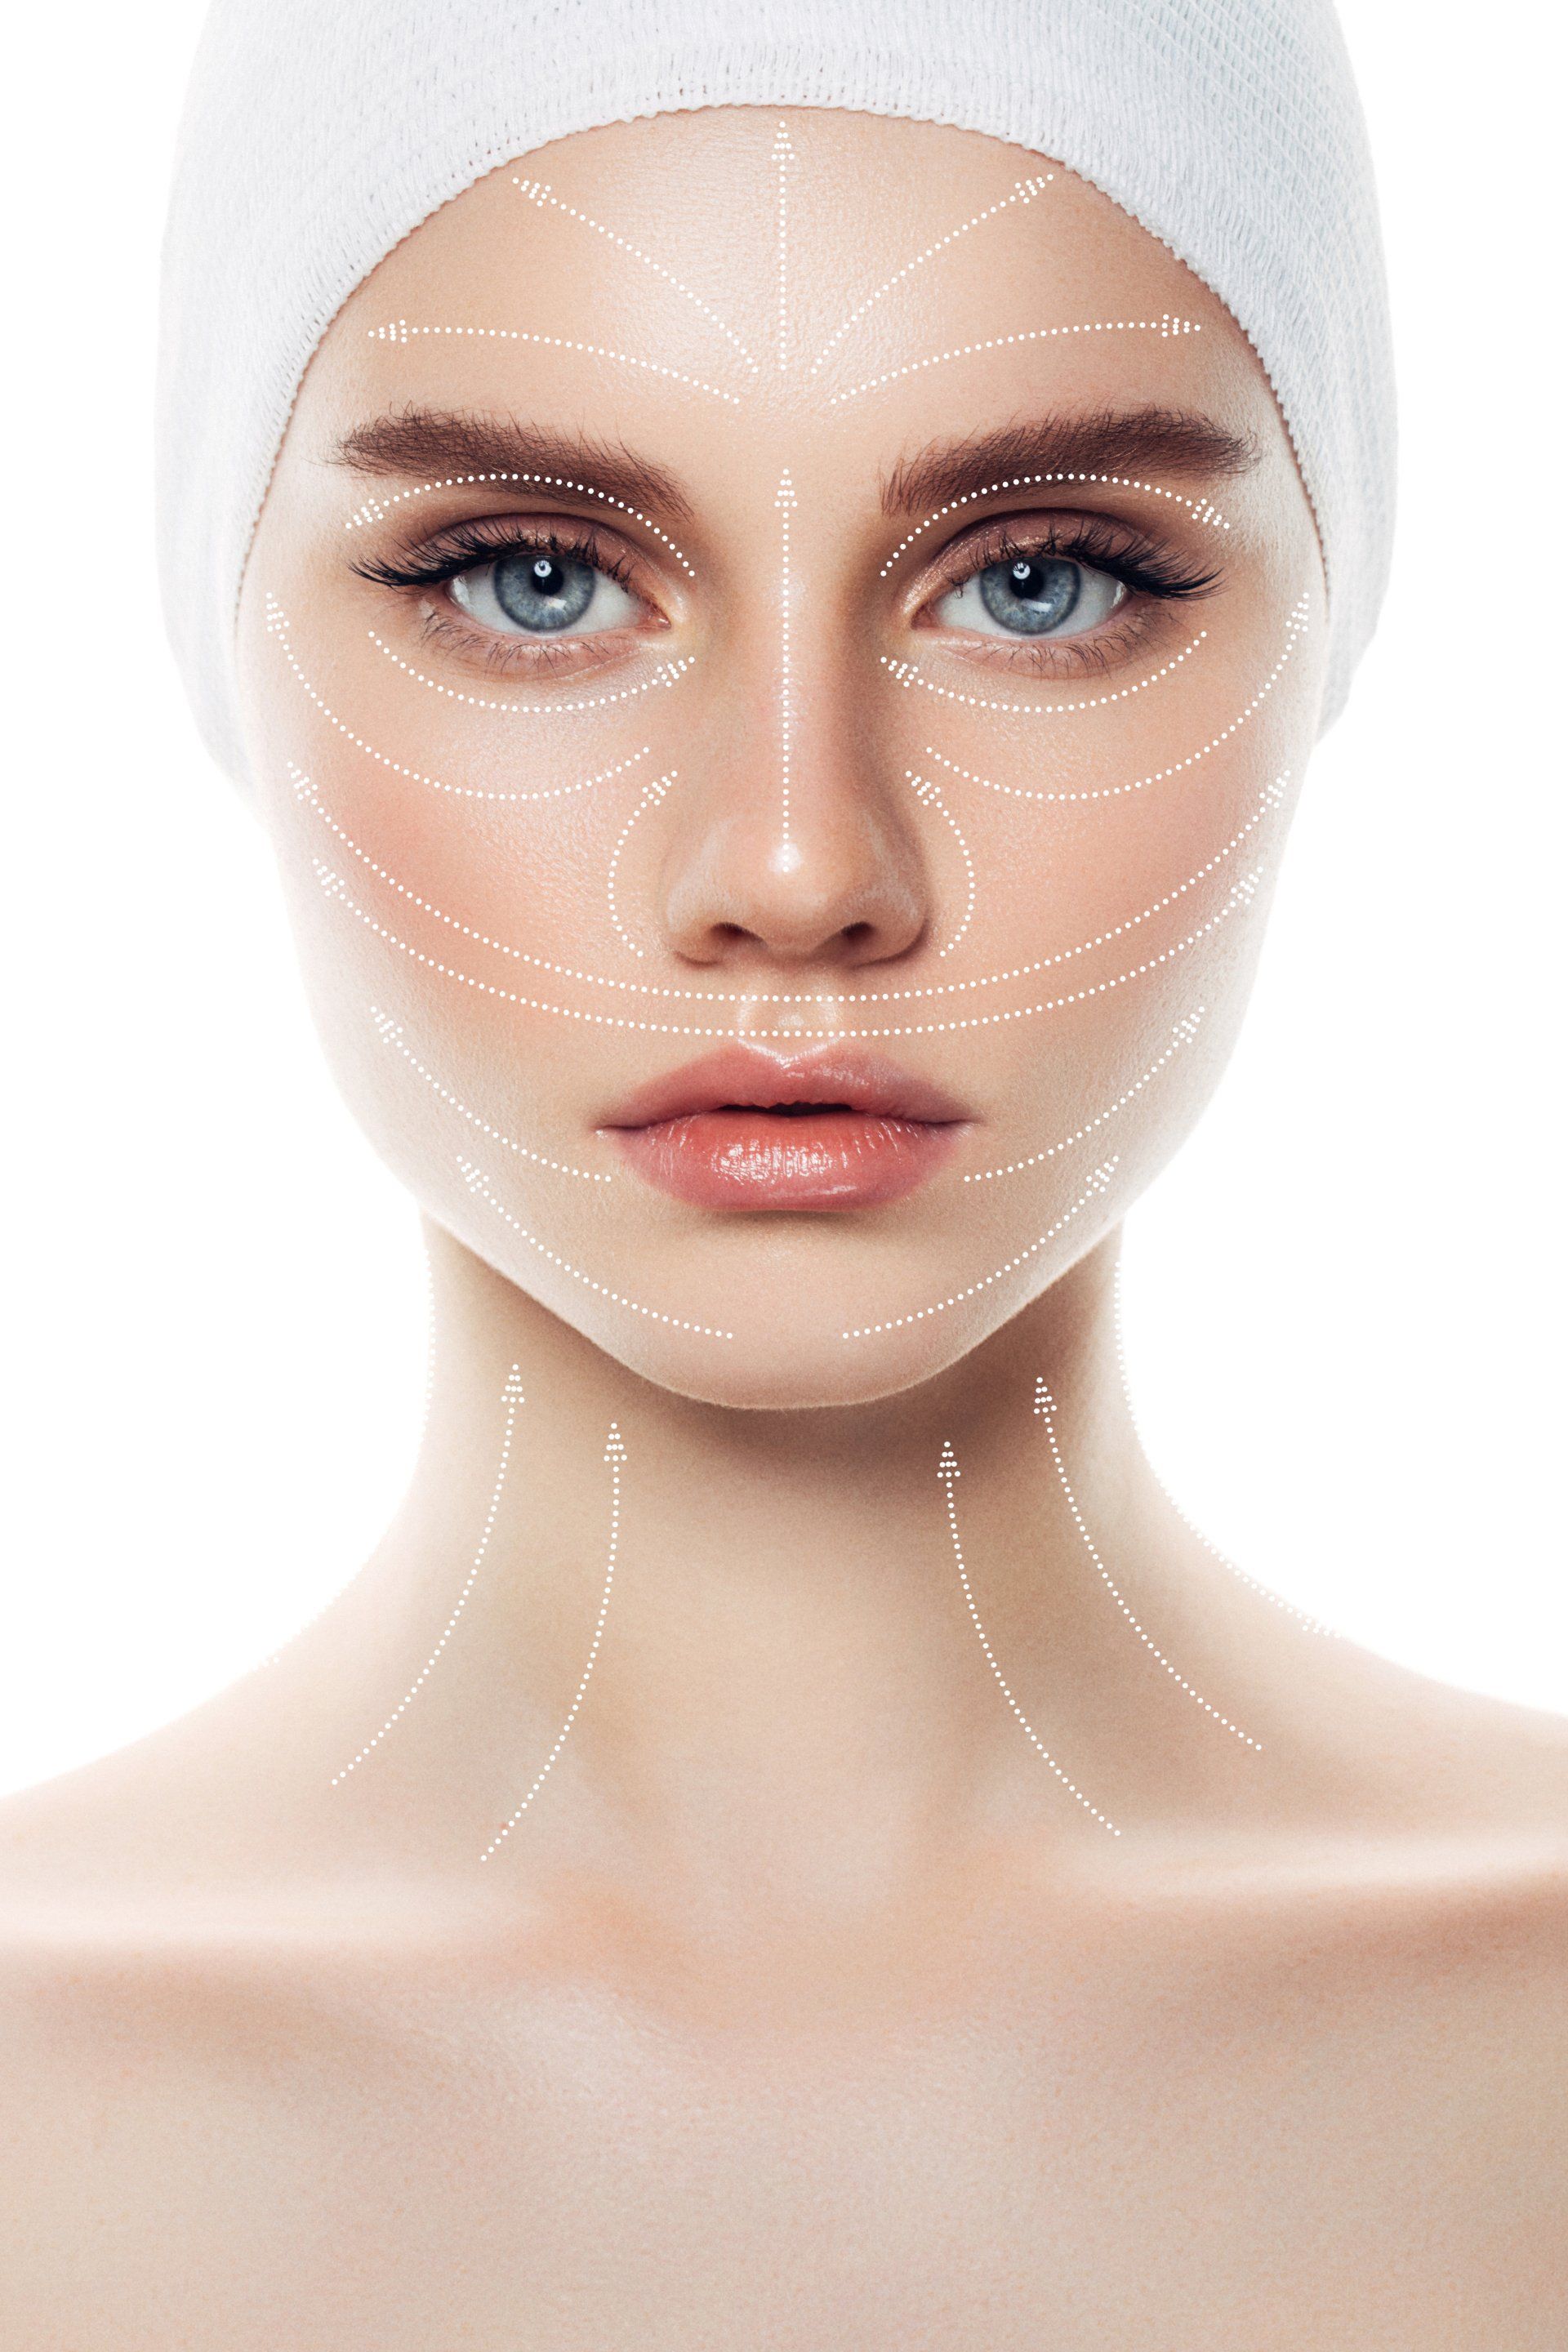 Woman Getting A Botox Injection On Her Face - Knoxville, TN - Dr. Joseph T. Chun, MD, FACS